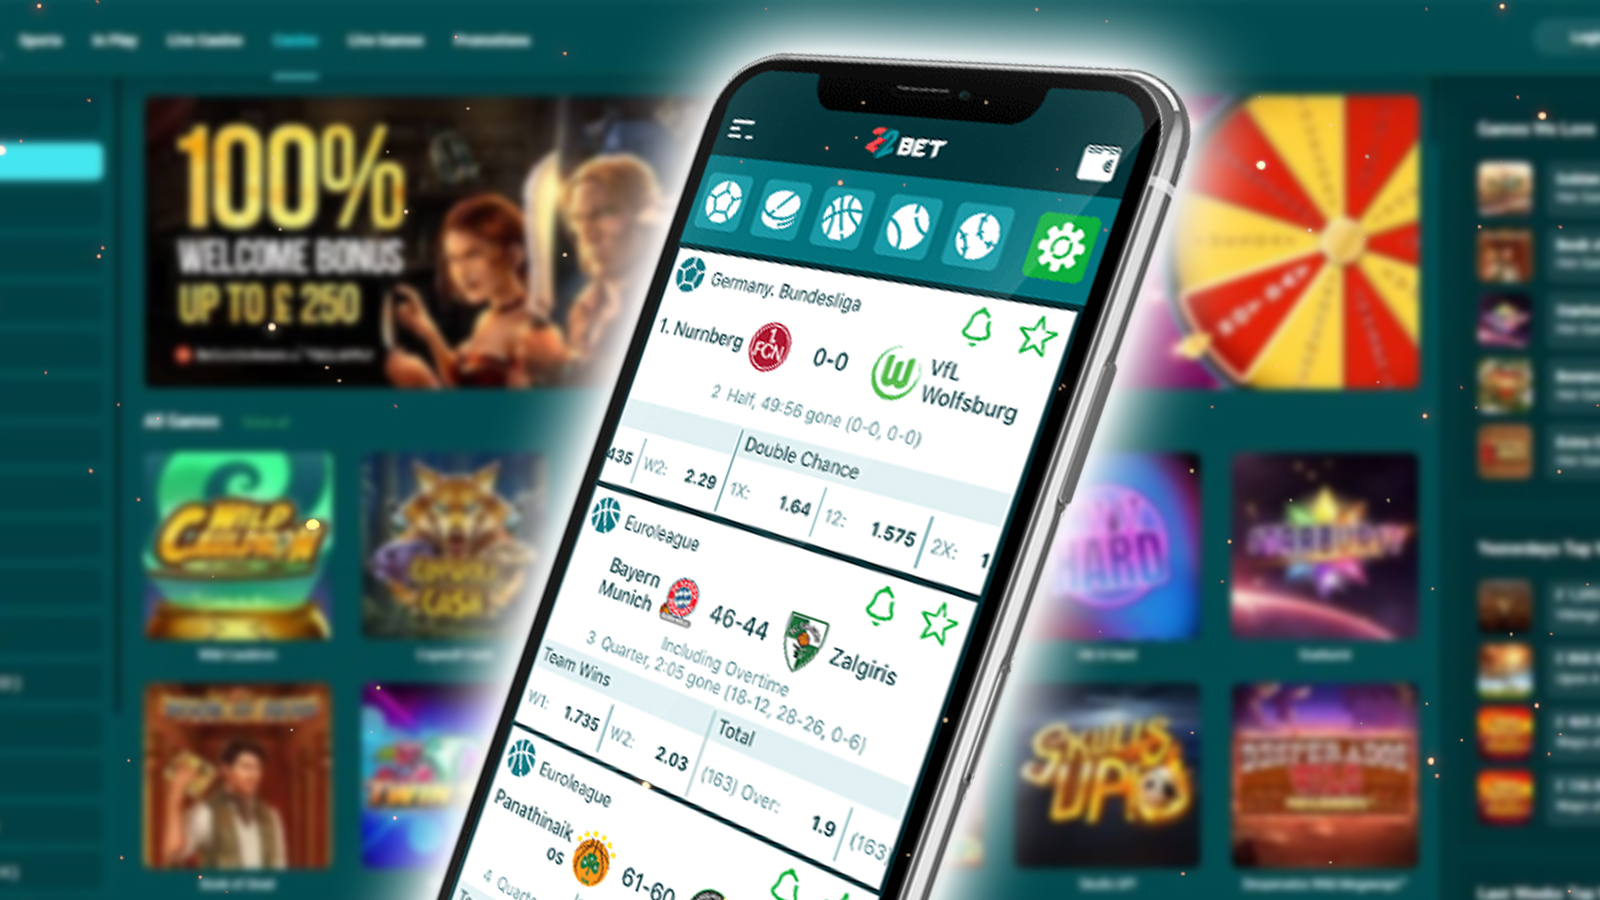 Download and install the 22bet Casino app to play games whenever you want.